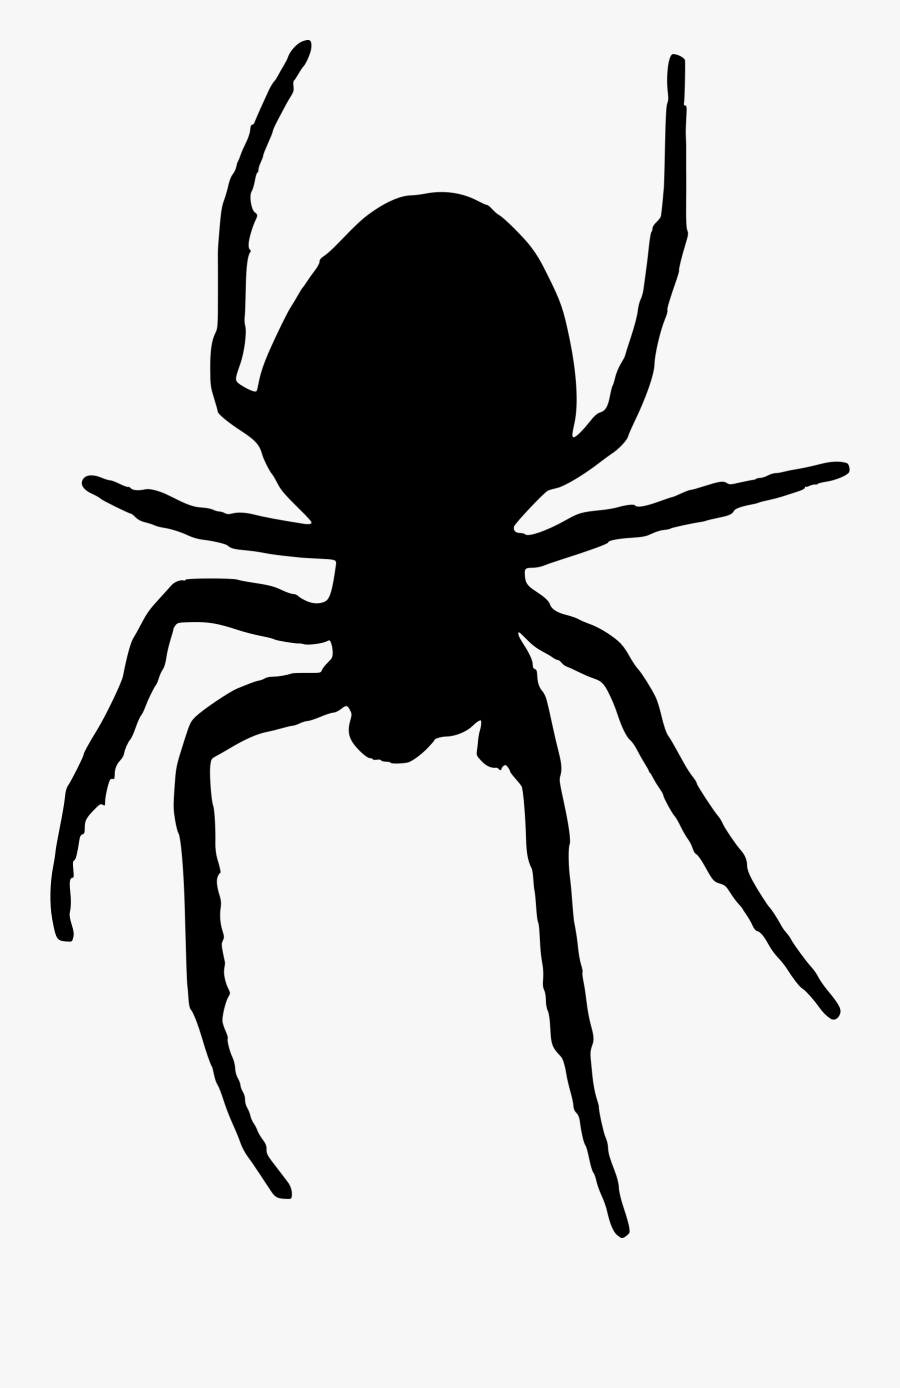 Scary Spider Clipart - Spider Silhouette Png, Transparent Clipart